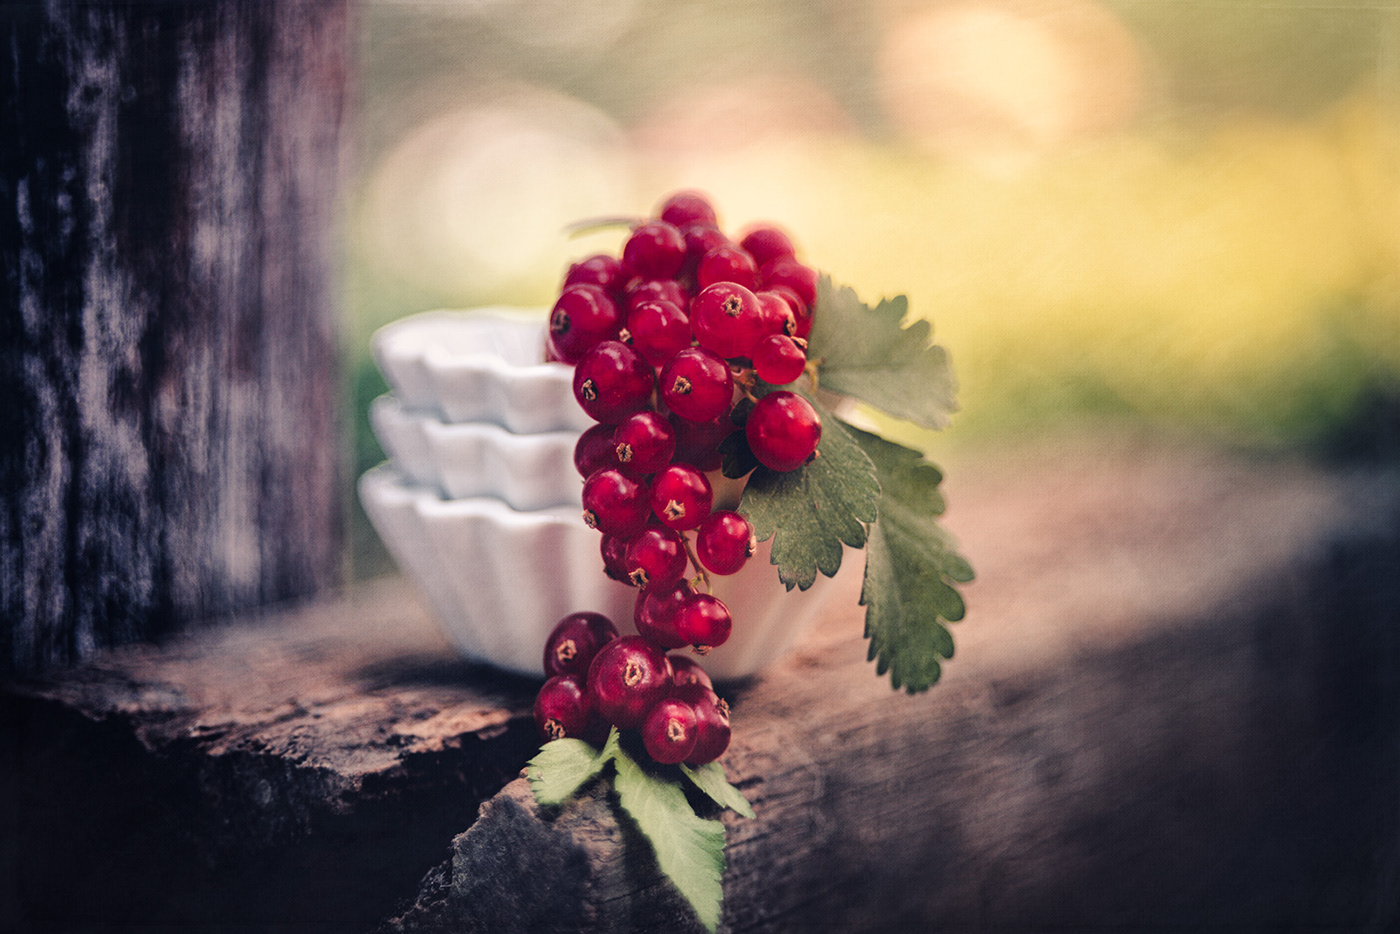 garden outdoors fruits red berries rustic summer colorful red green selective focus